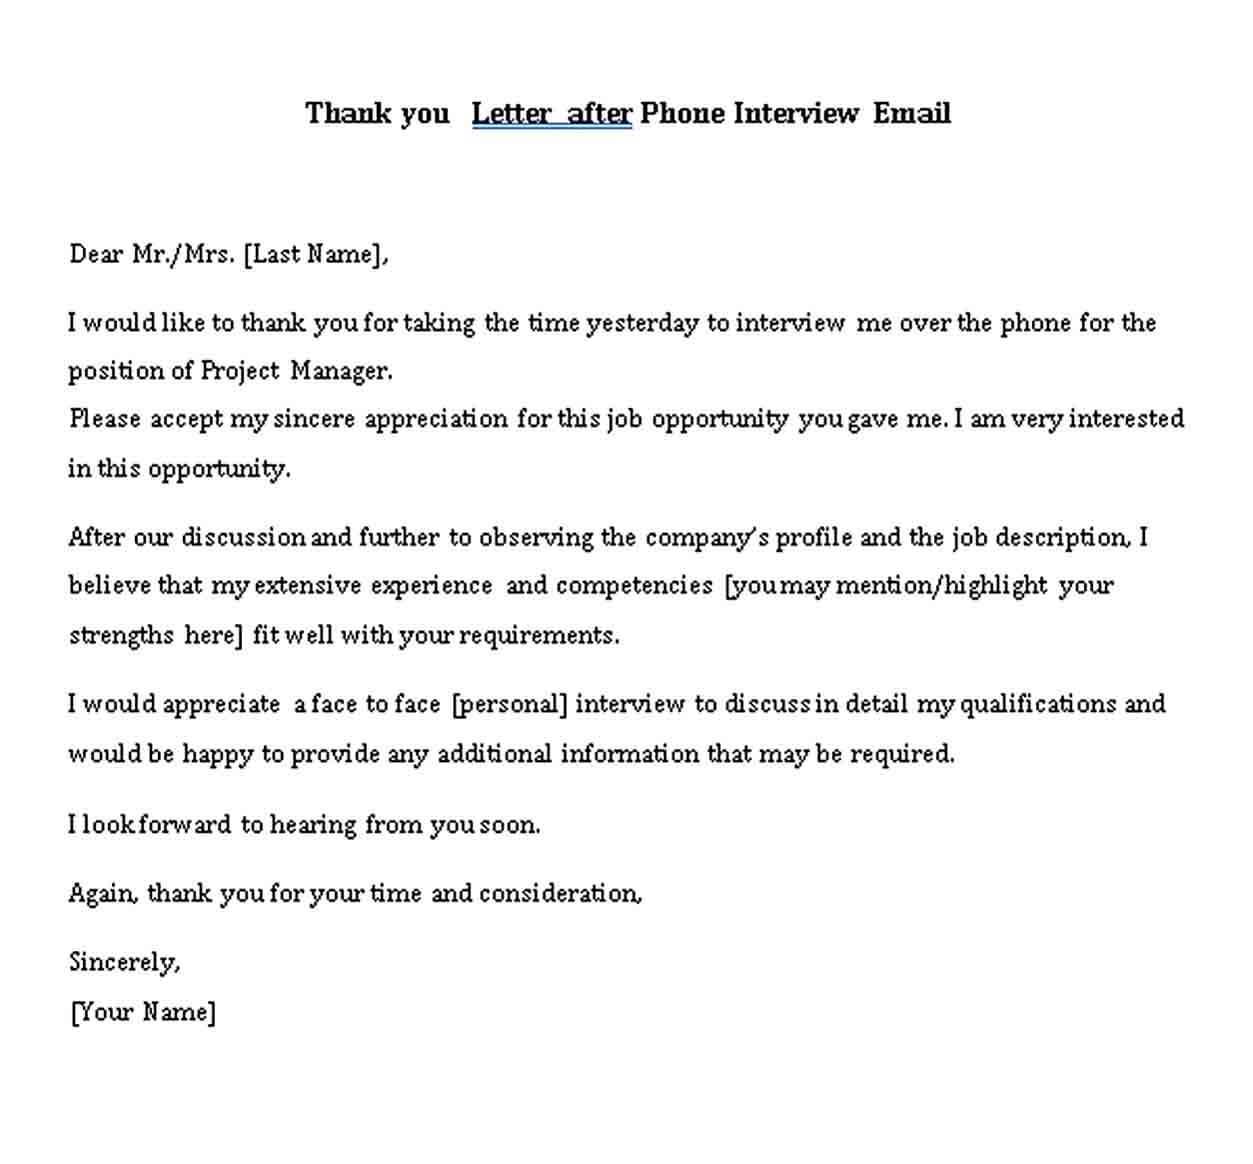 Thank you Letter after Phone Interview Email